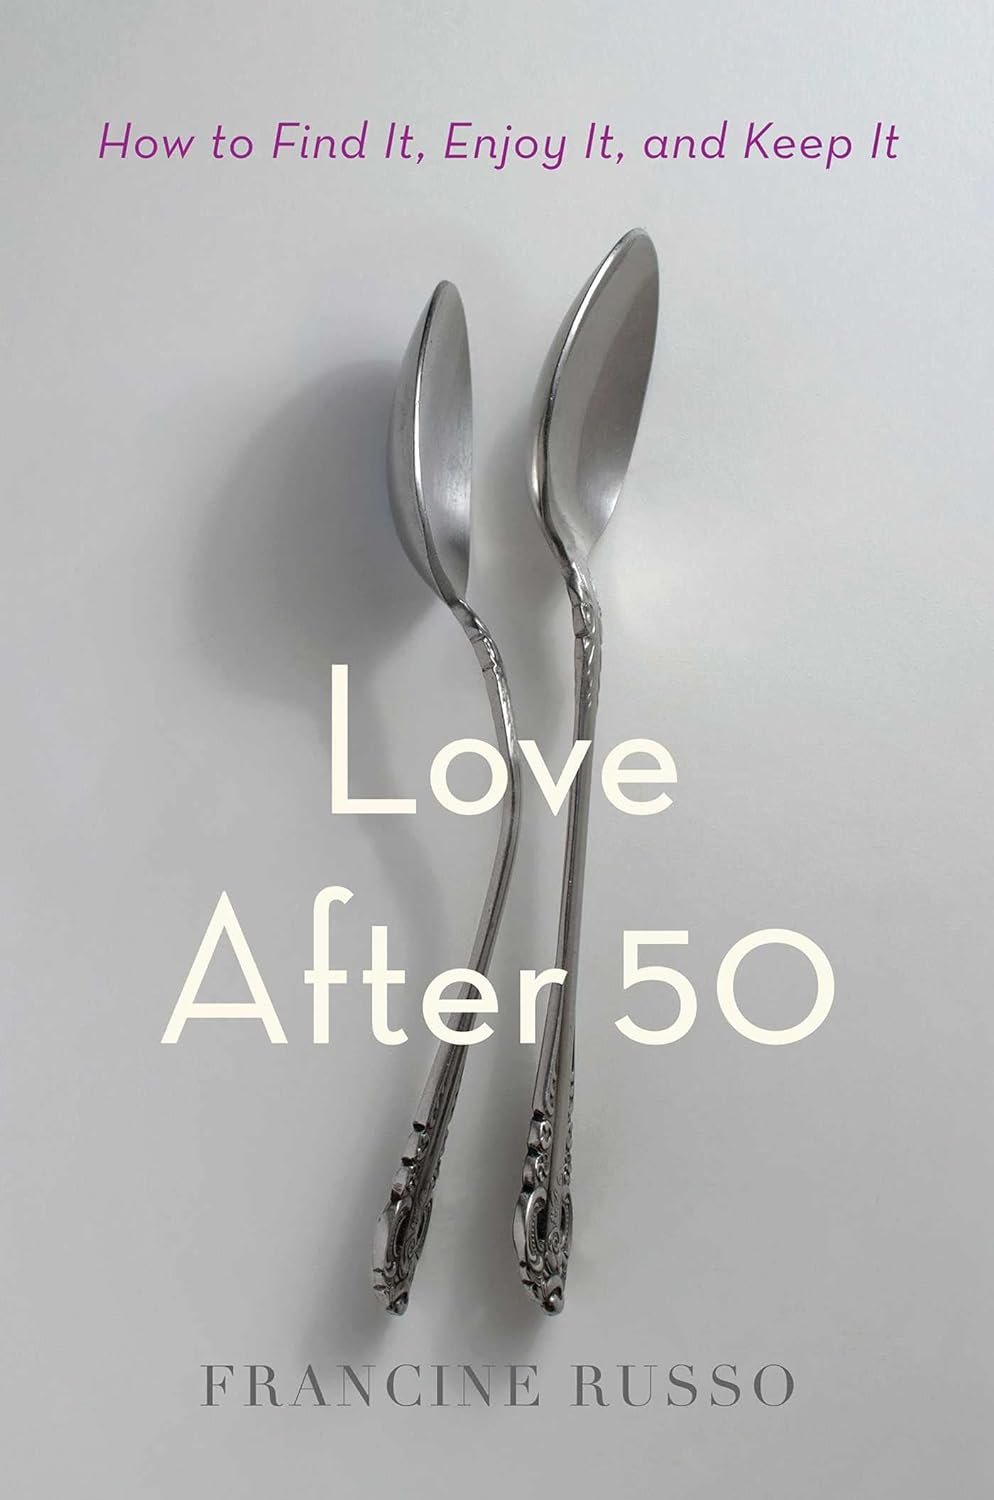 Love After 50: How to Find It, Enjoy It, and Keep It